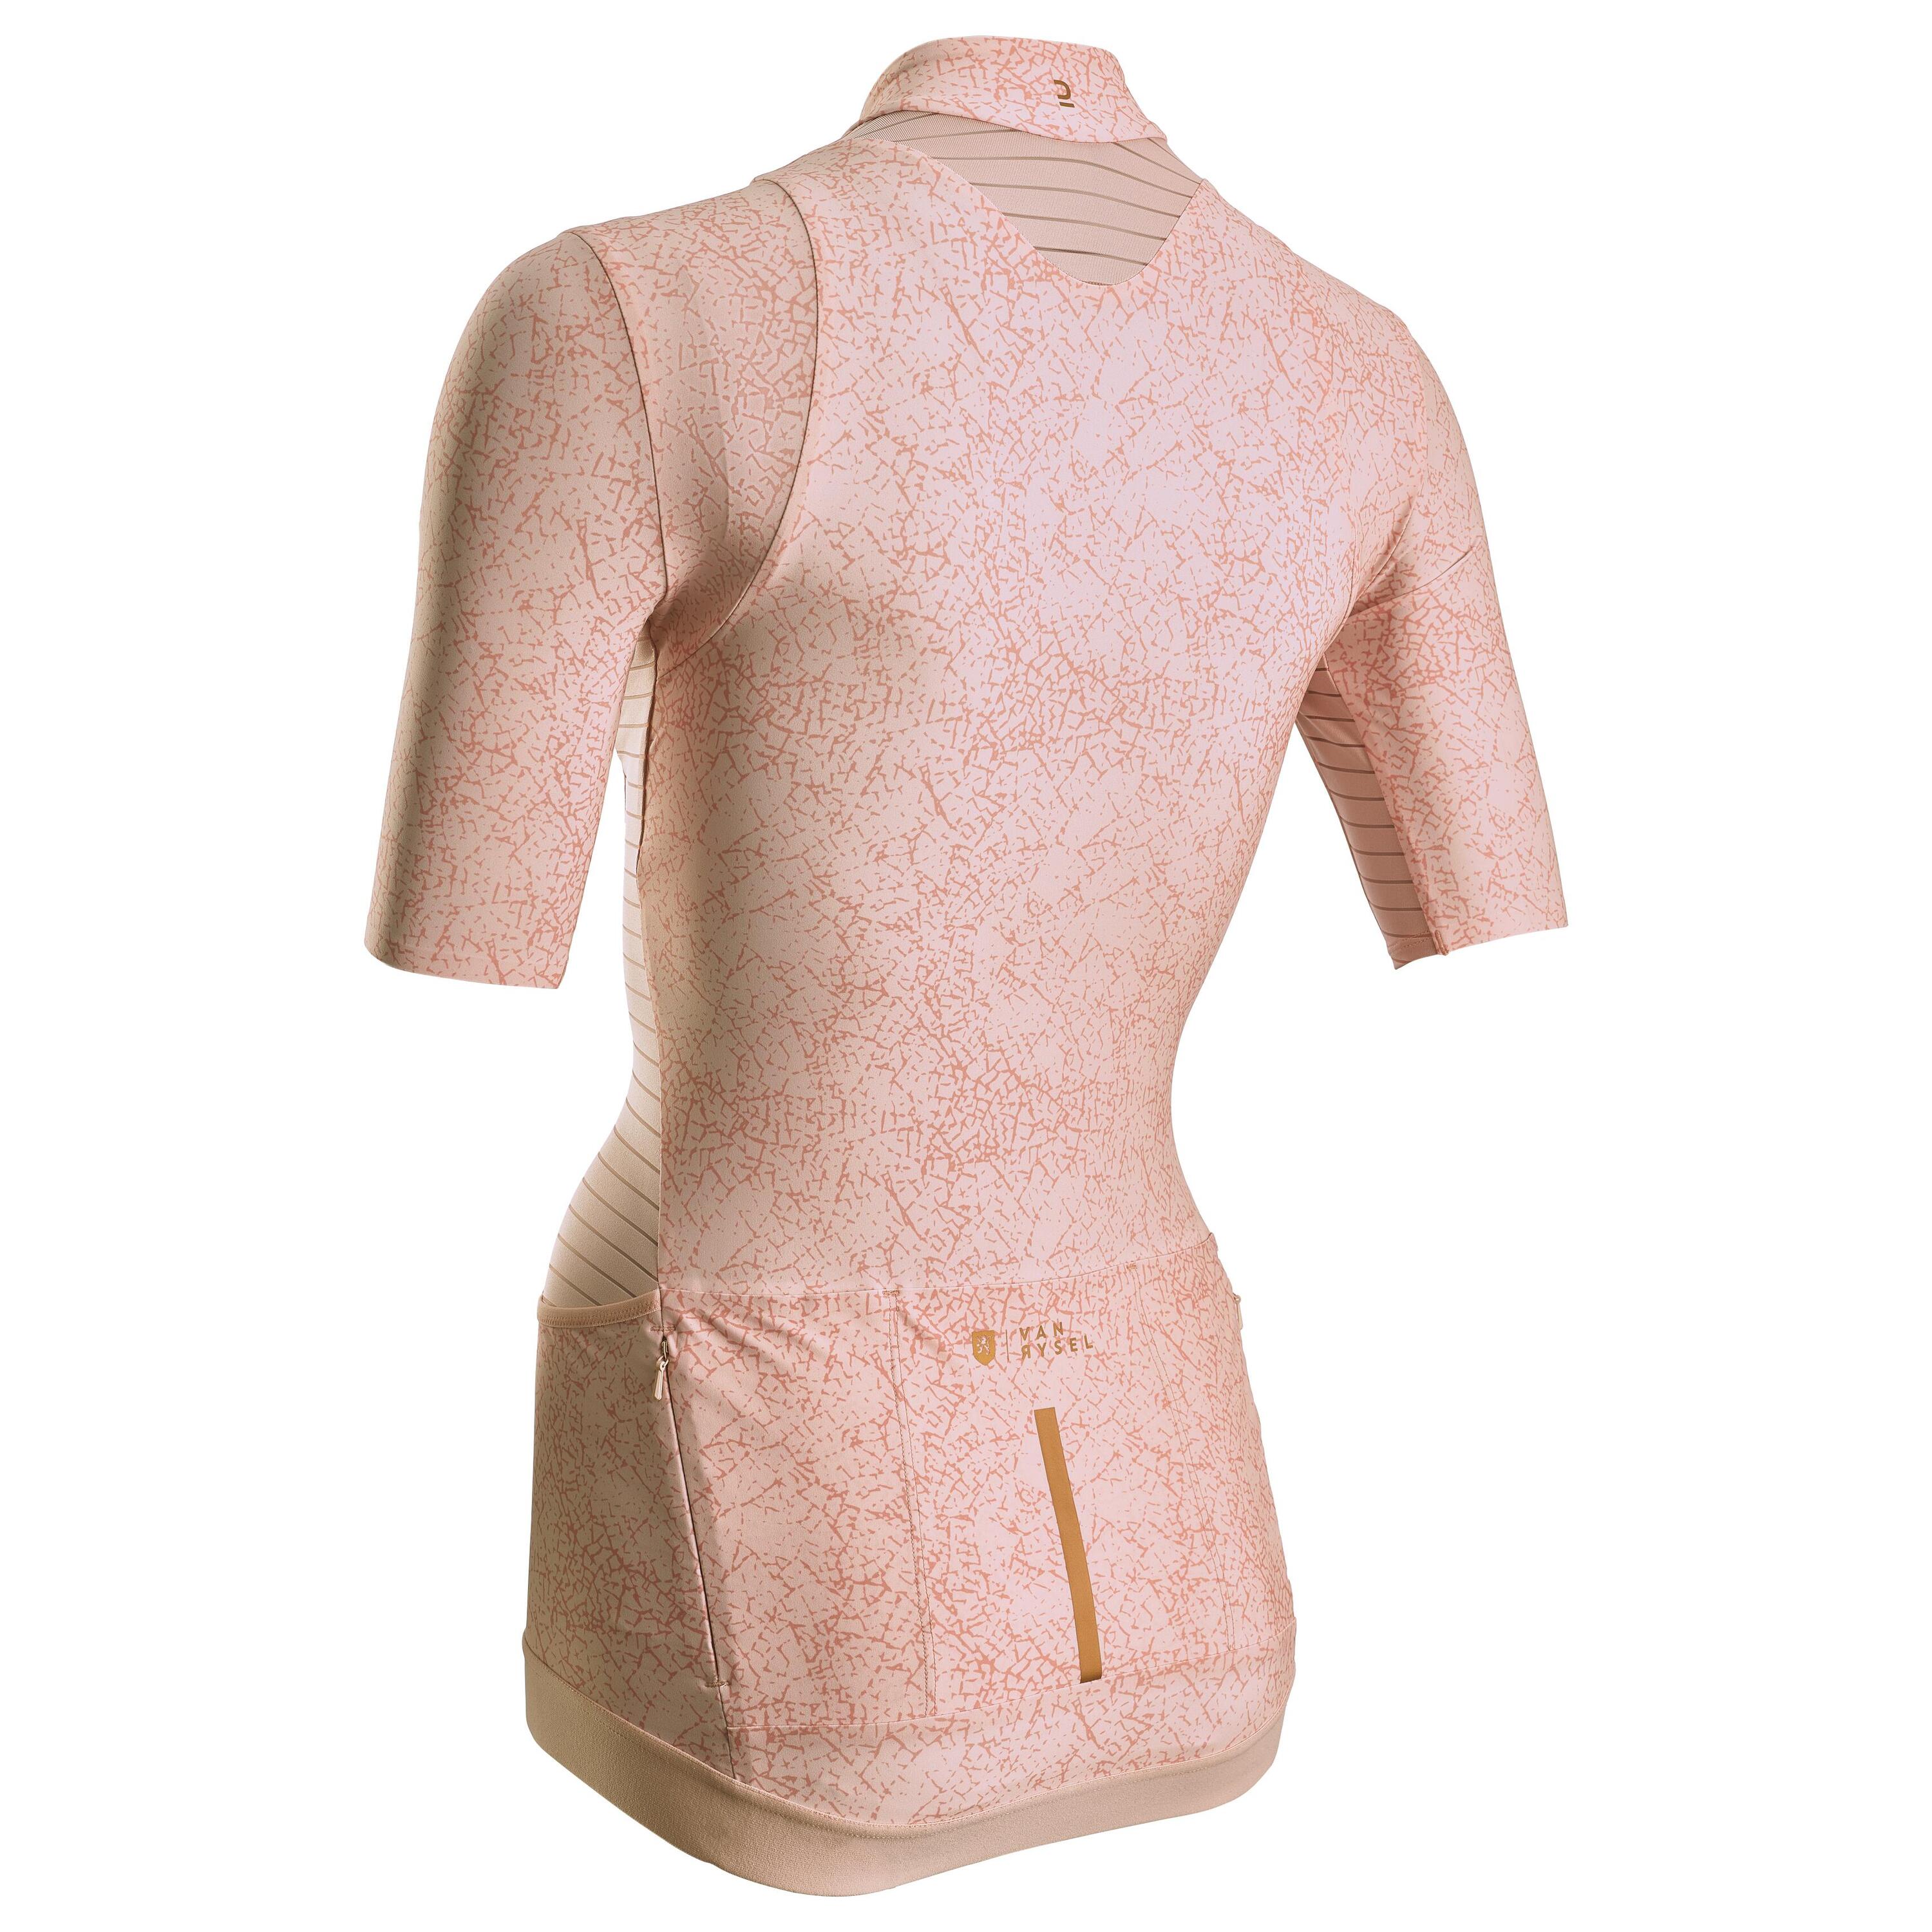 Women's Short-Sleeved Road Cycling Jersey Racer - Cracked Pink 2/5